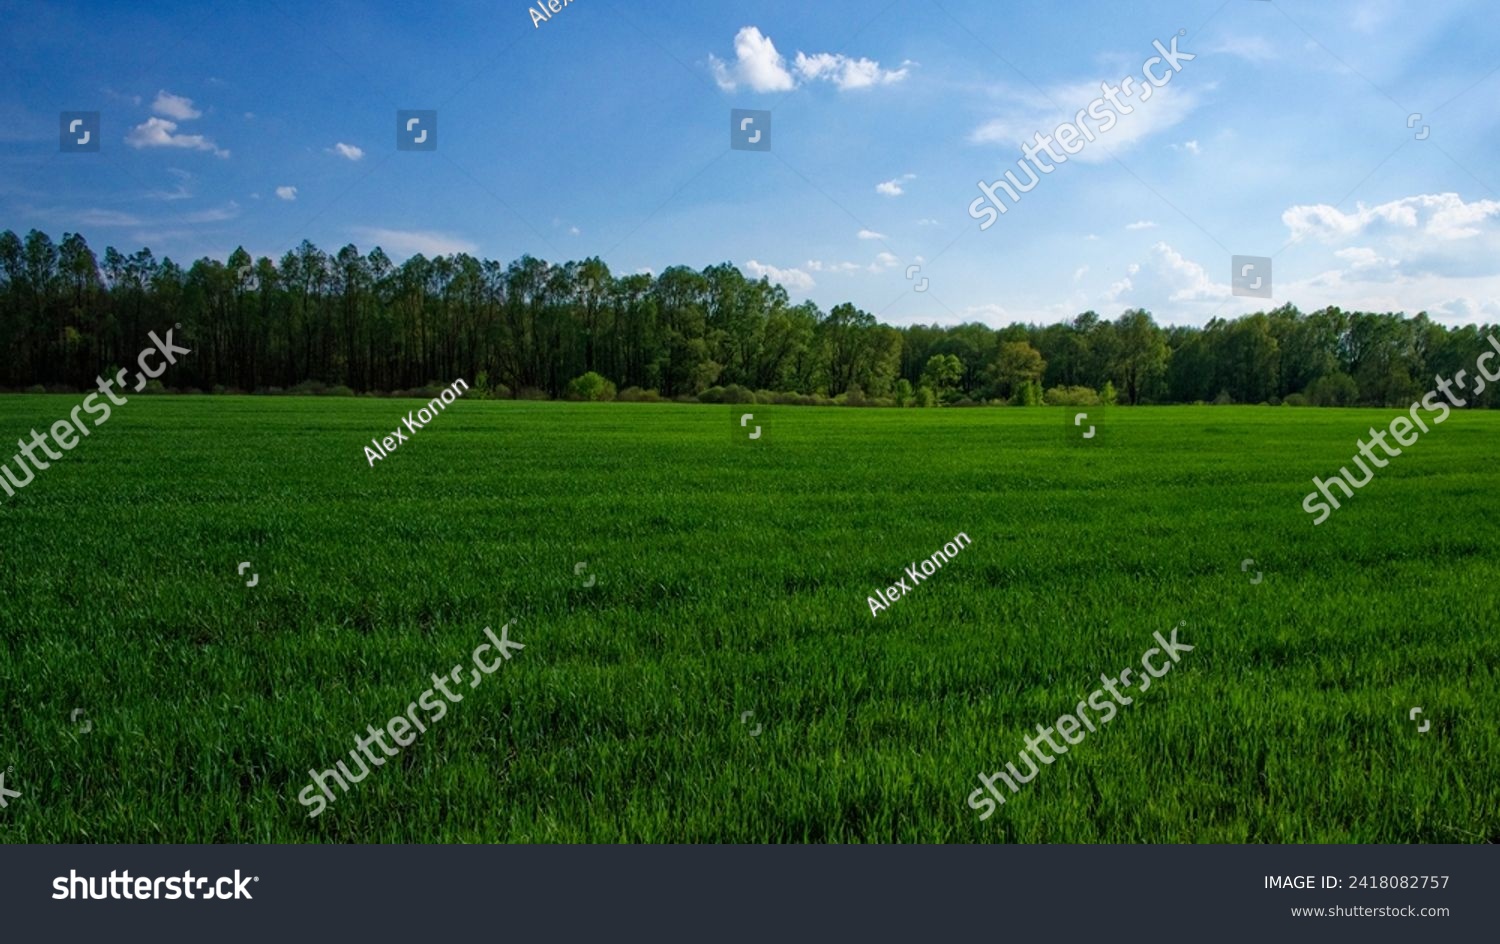 A vast green field under a blue sky with scattered clouds, bordered by a dense forest. #2418082757